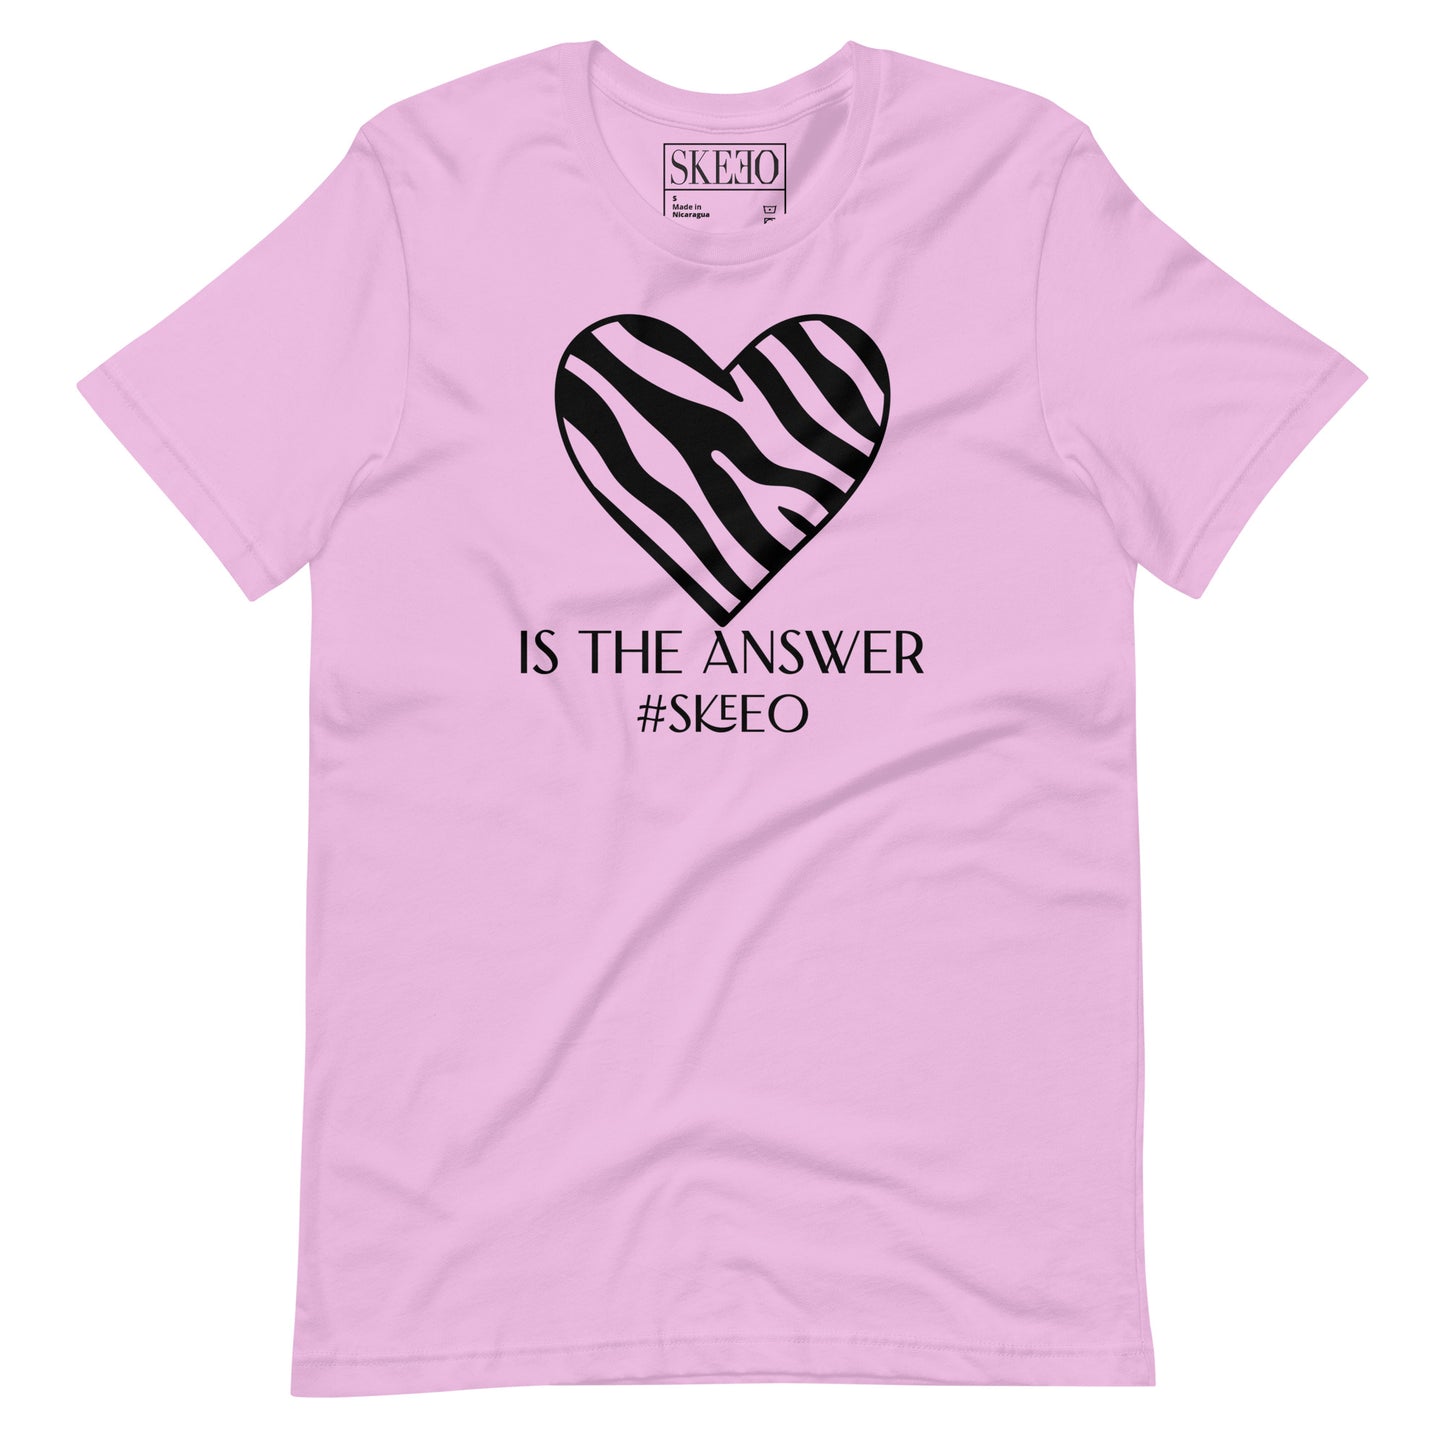 SK A A Lover is the answer t-shirt